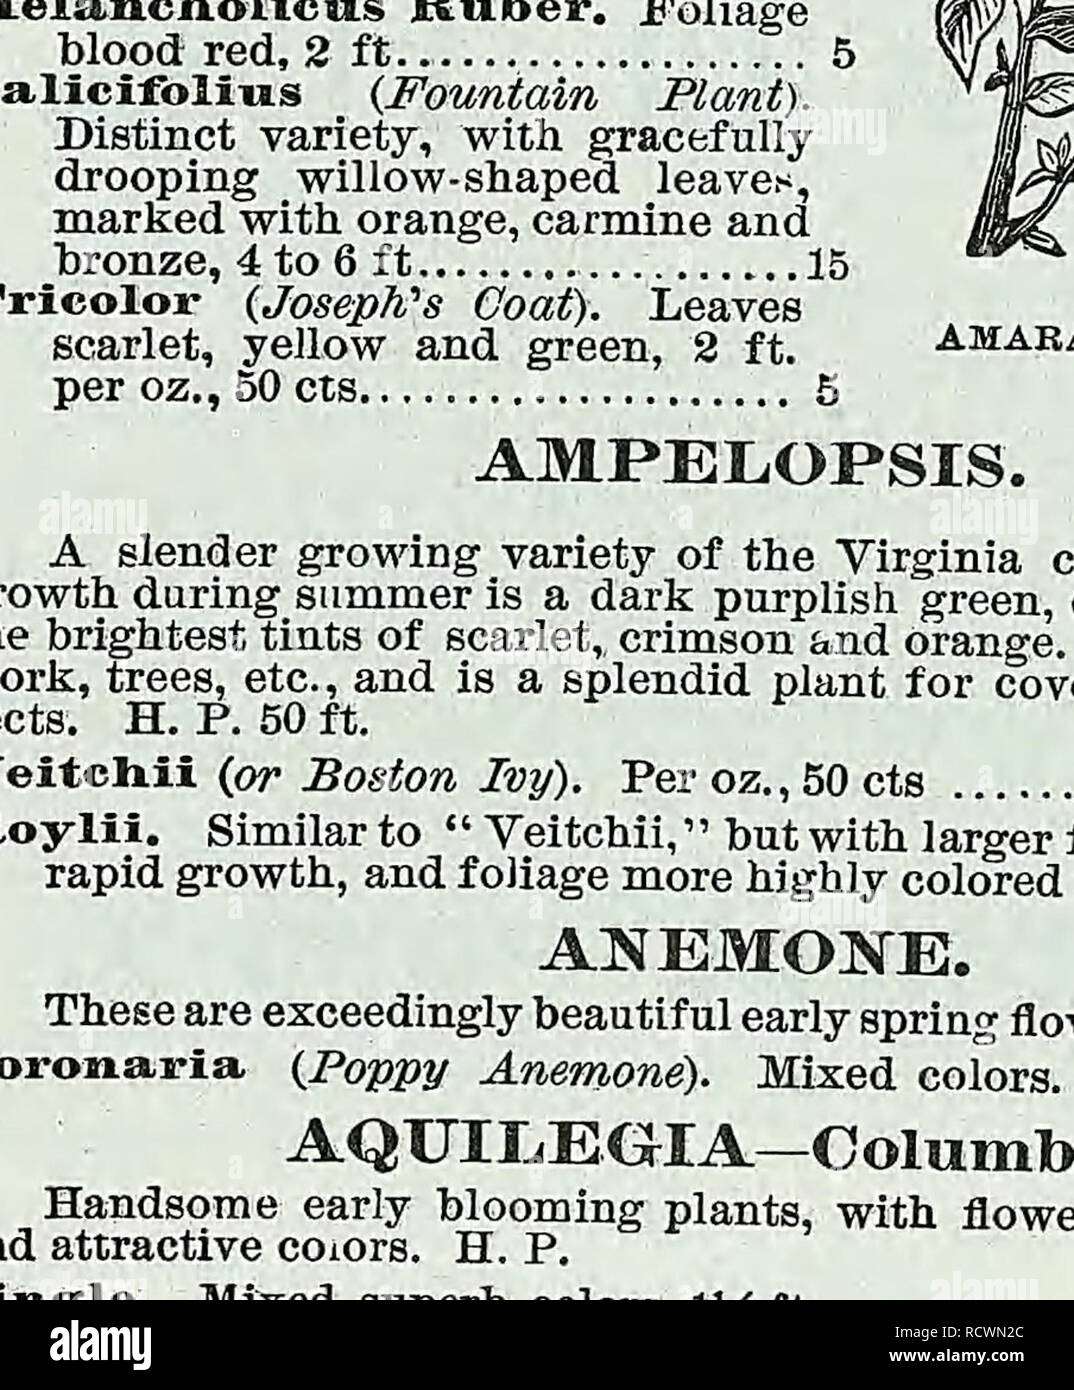 . Descriptive catalogue of vegetable, flower, and farm seeds. Nurseries (Horticulture); Nursery stock; Seeds; Bulbs (Plants); Gardening; Equipment and supplies; Bedding plants; Weeber &amp; Don. ANTIRRHINUM. ARNEBIA CORNUTA—Arabian Primrose. PER PKT. The blossoms are of a brilliant yellow color with five large black spots. The latter change into a coffee-brown shade on the second day, and disappear altogether cn the third day of its bloom, so that pure yellow and spotted flowers are on the same flowering branch. H.A.,2f.t 25 ASPARAGUS PLUMOSUS 1ST AN A. Graceful and feathery bright green folia Stock Photo